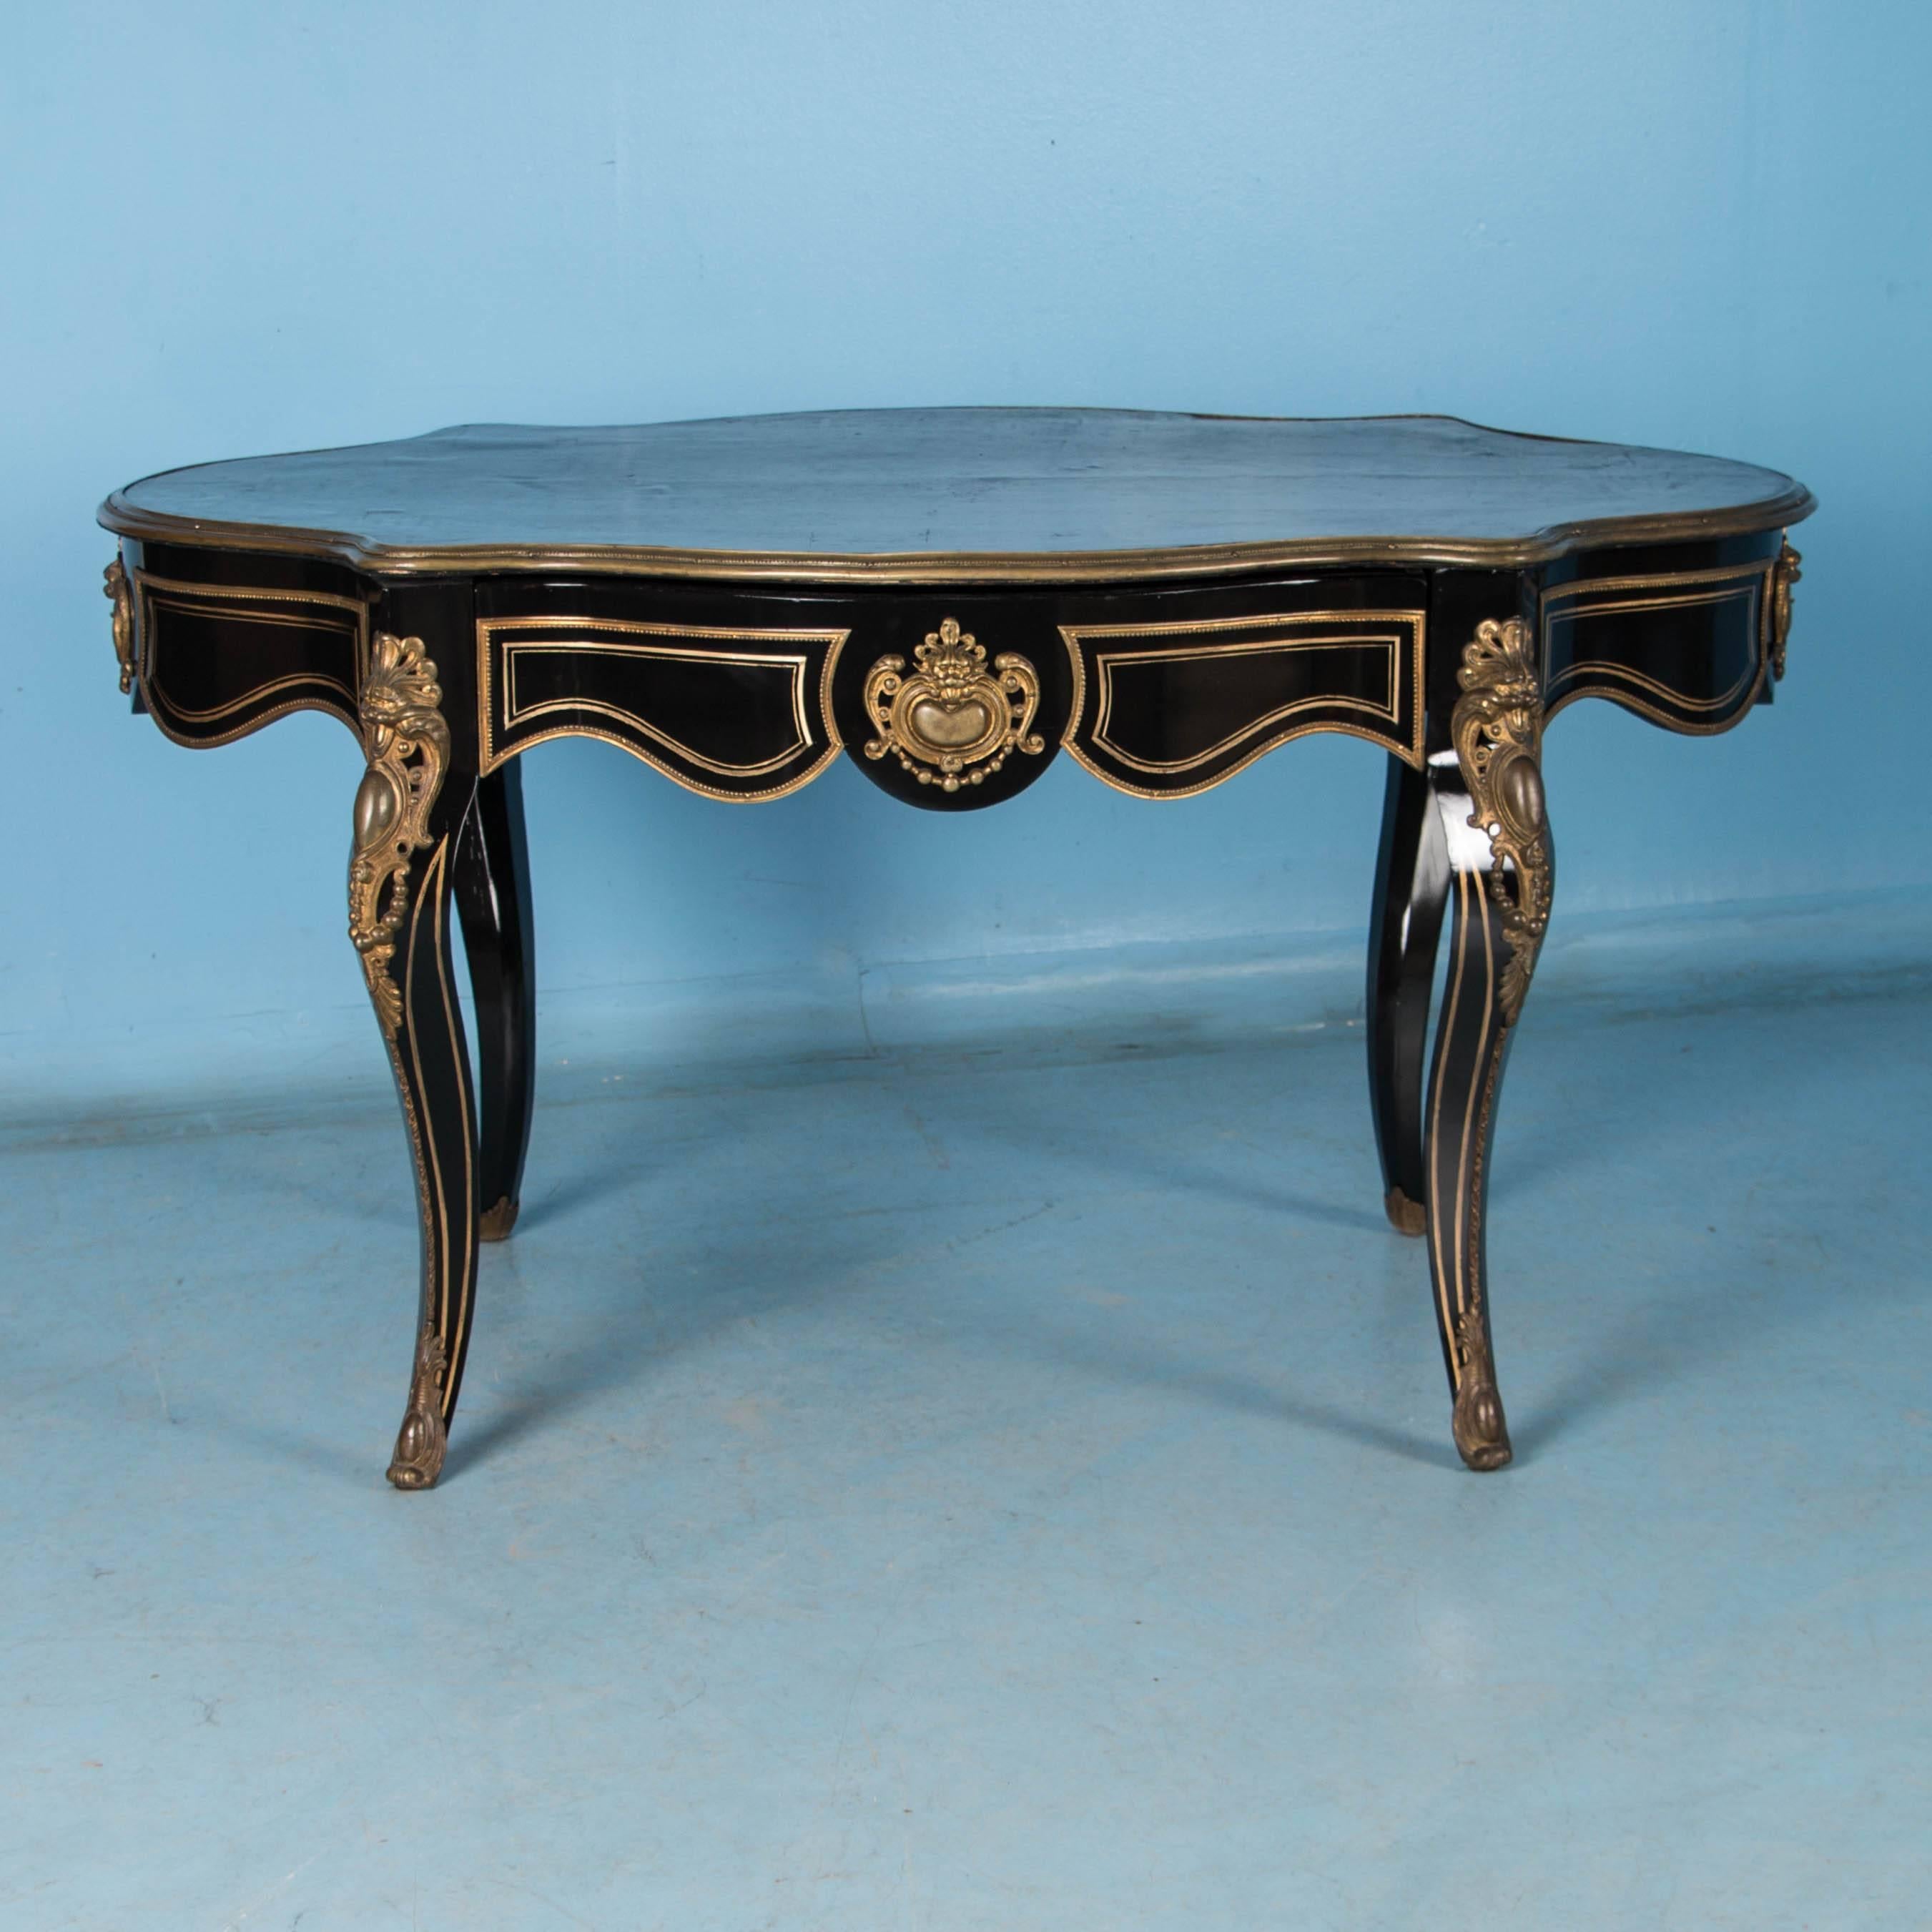 This elegant French Louis XV style ebonized desk features ornate gilt brass ormolu mounts and cabriole legs. The desk is freestanding which allows one to appreciate the elaborate brass details on all sides. The dark green leather has a deep aged